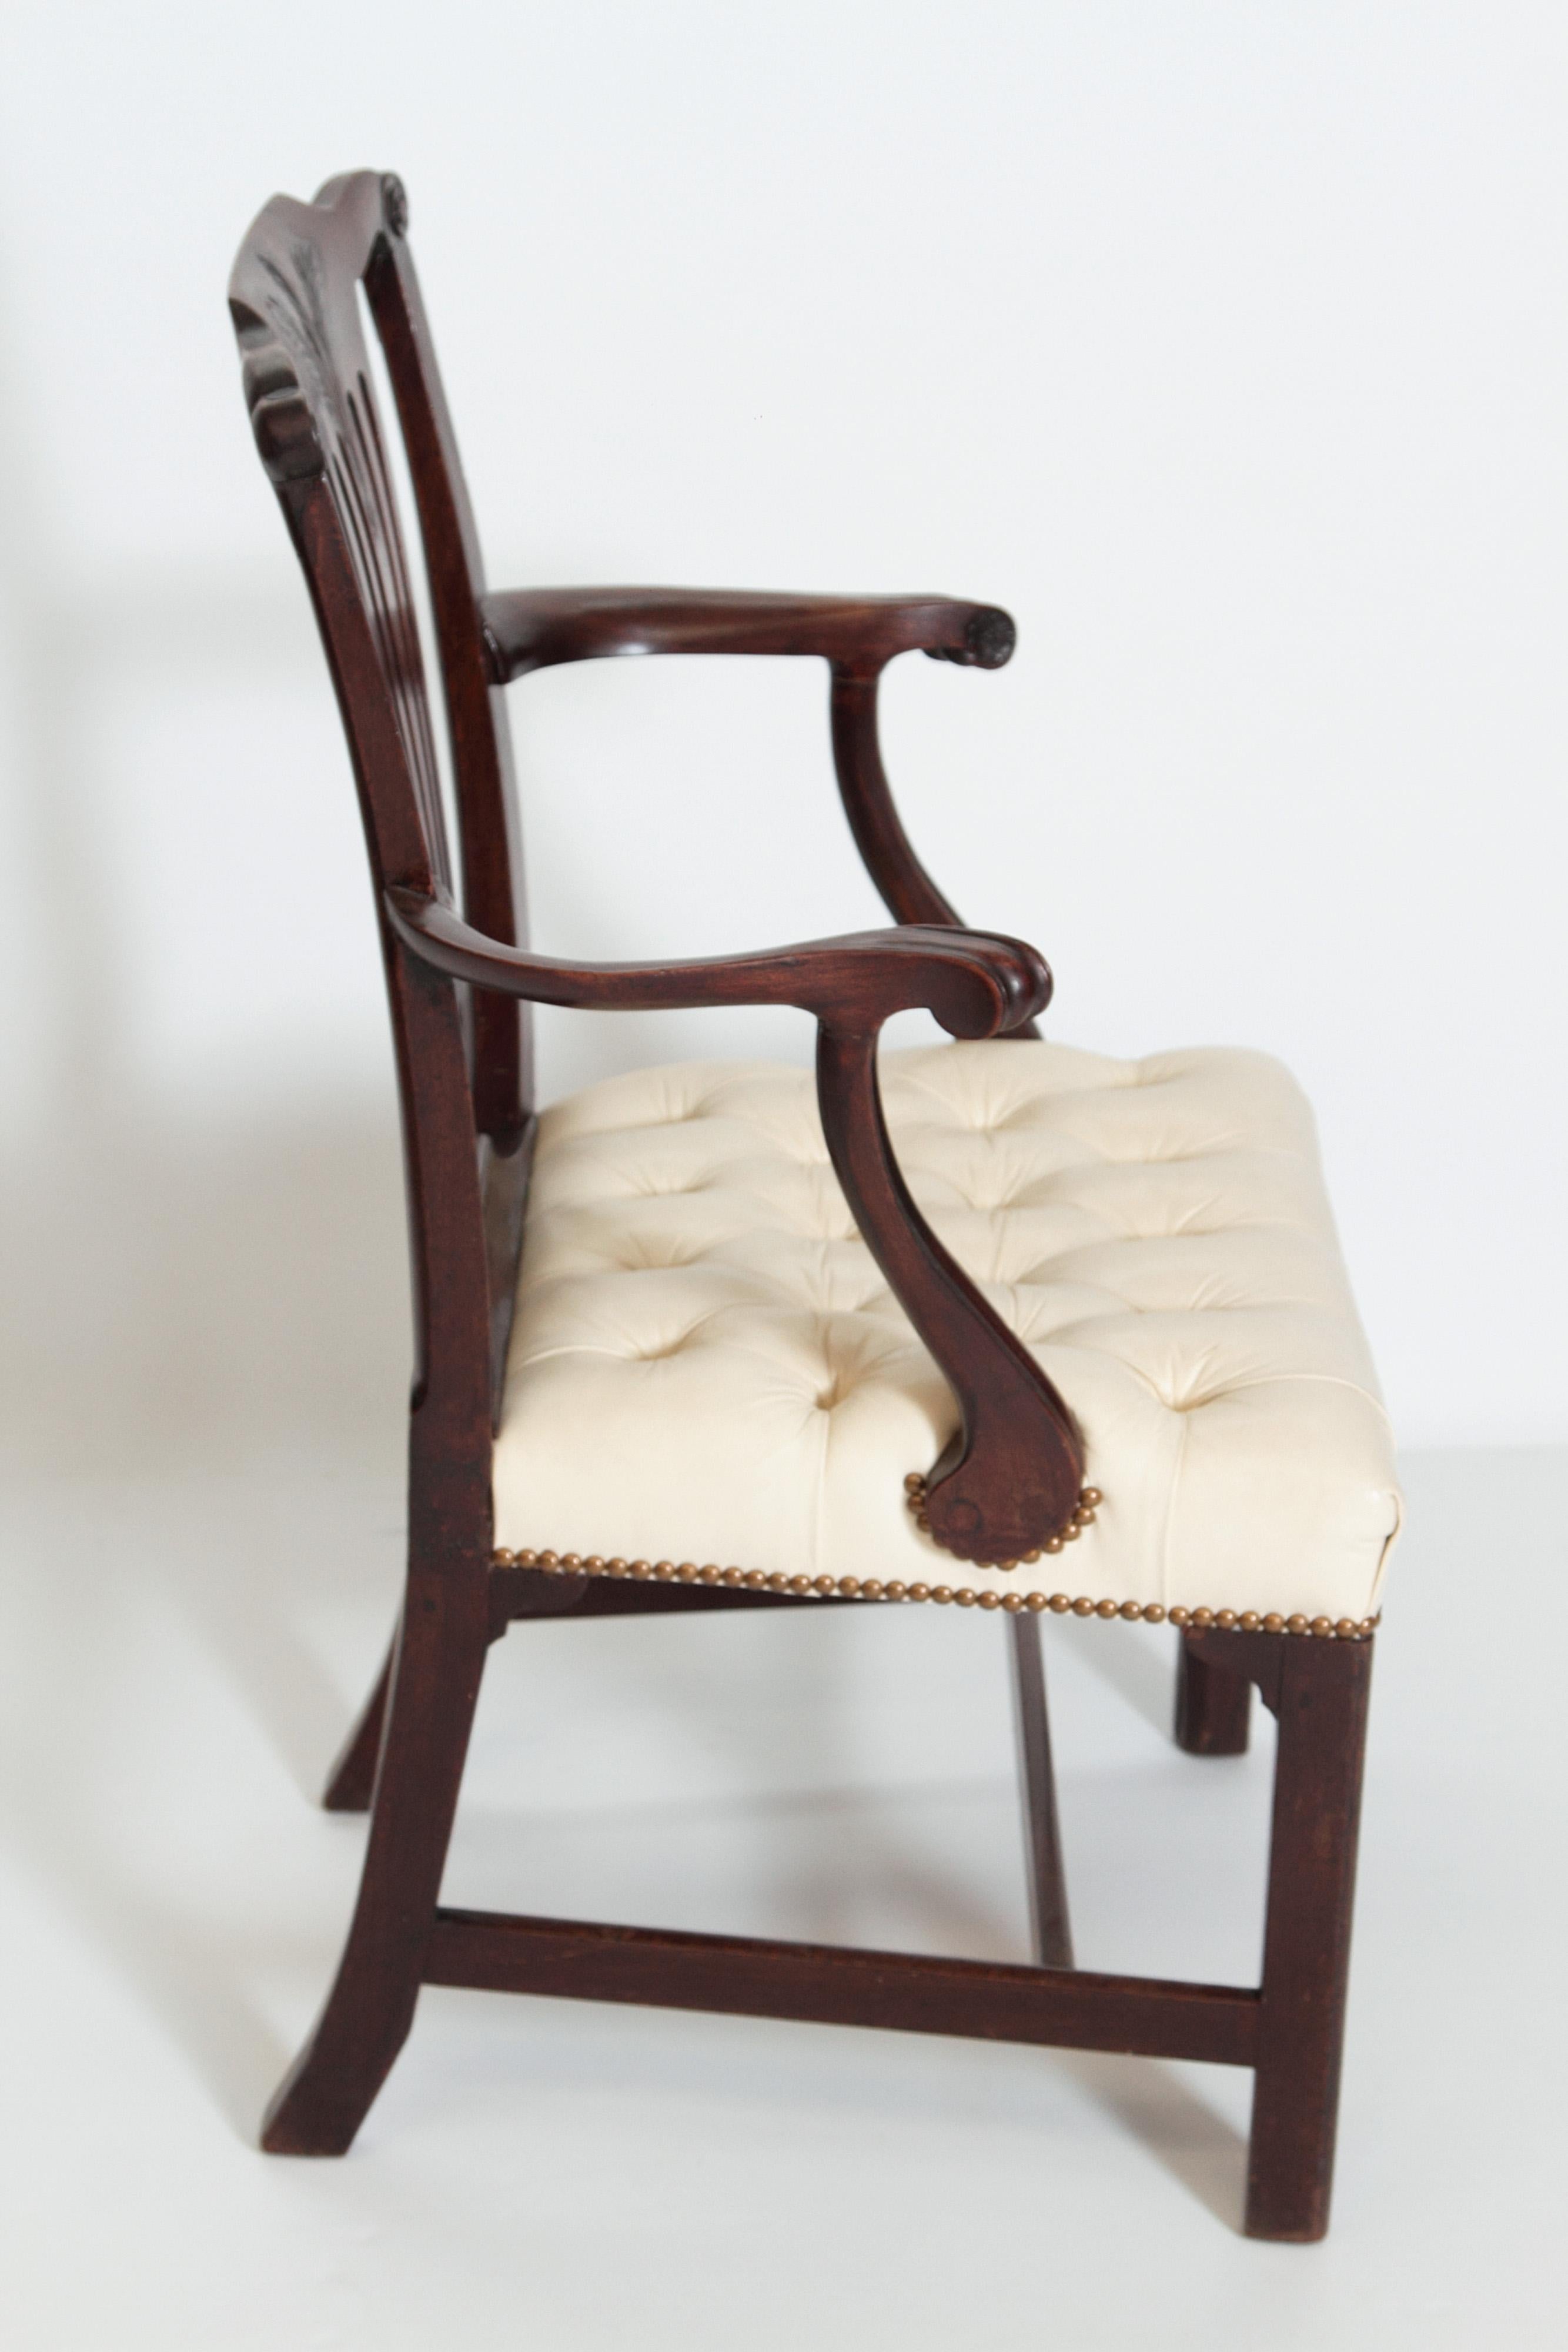 English Late 18th Century Chippendale Mahogany Armchair